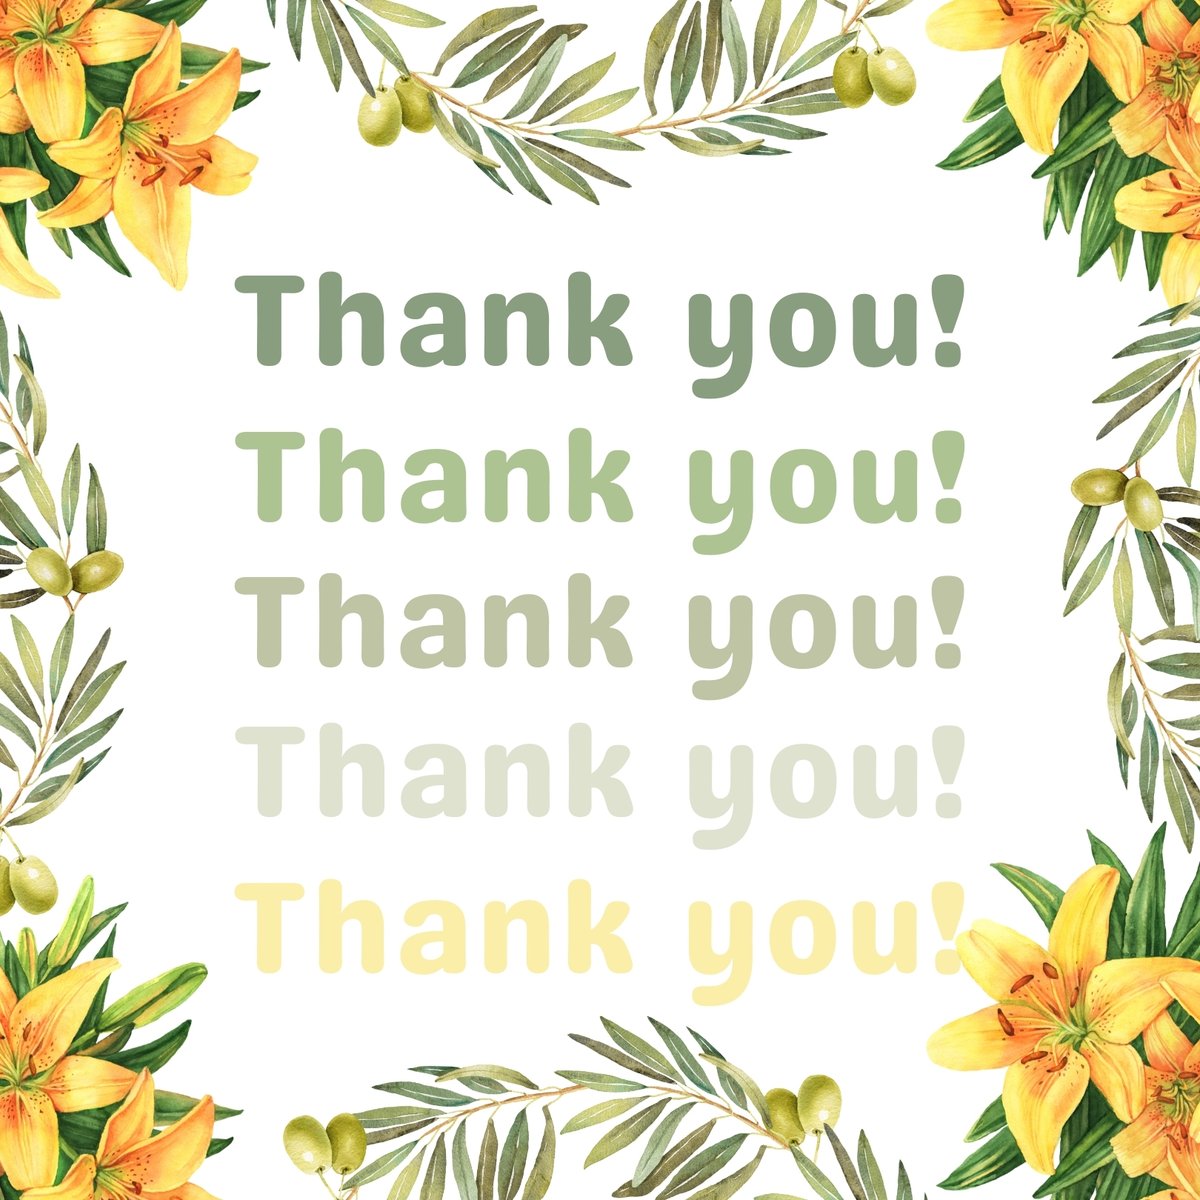 #ThankfulTuesday All of us @Laminatecom are so very thankful for you!